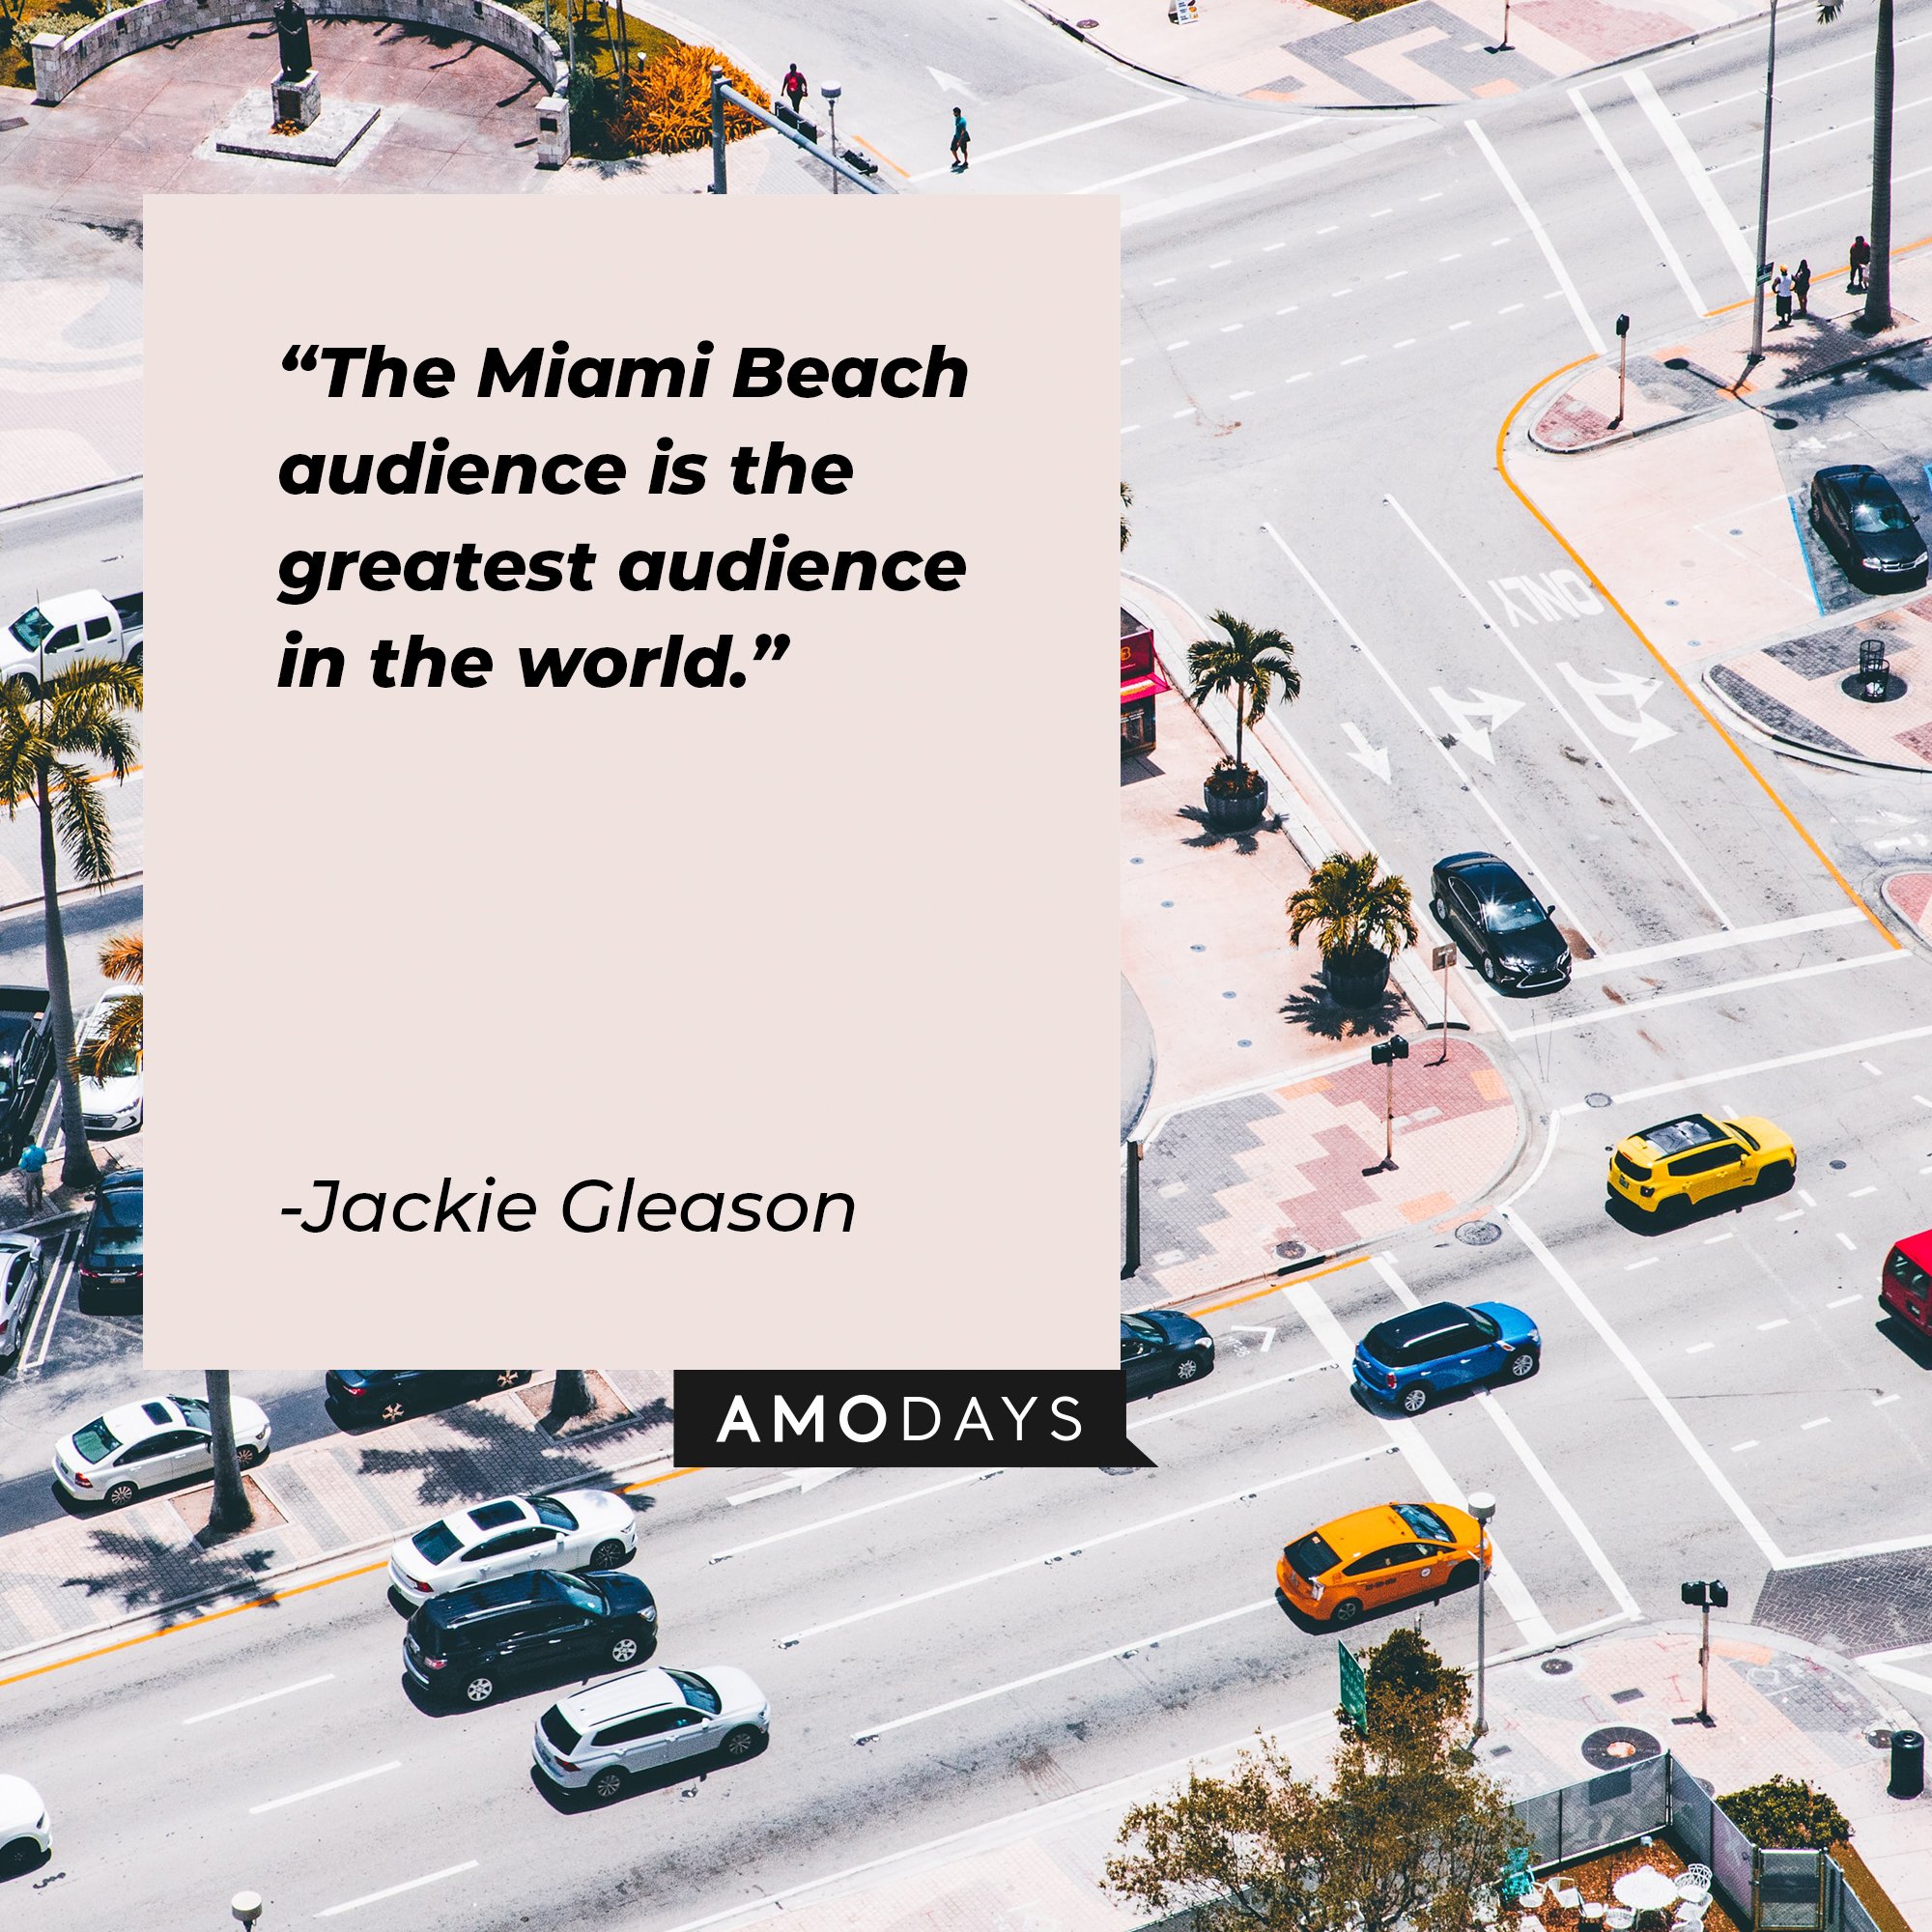 Jackie Gleason’s quote: "The Miami Beach audience is the greatest audience in the world." | Image: AmoDays